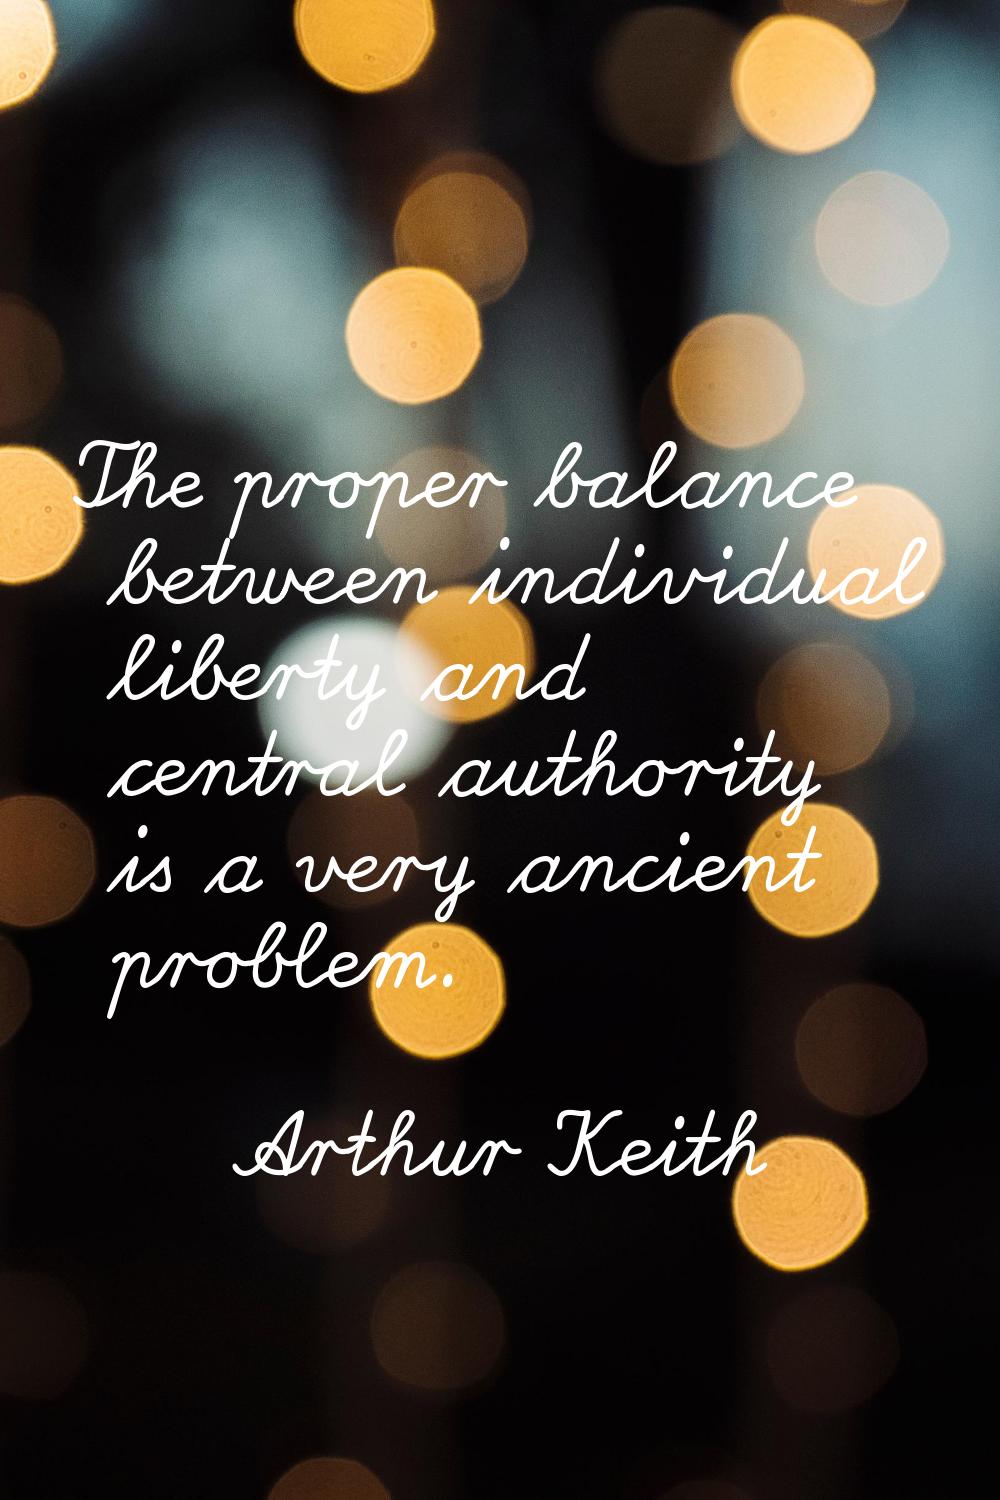 The proper balance between individual liberty and central authority is a very ancient problem.